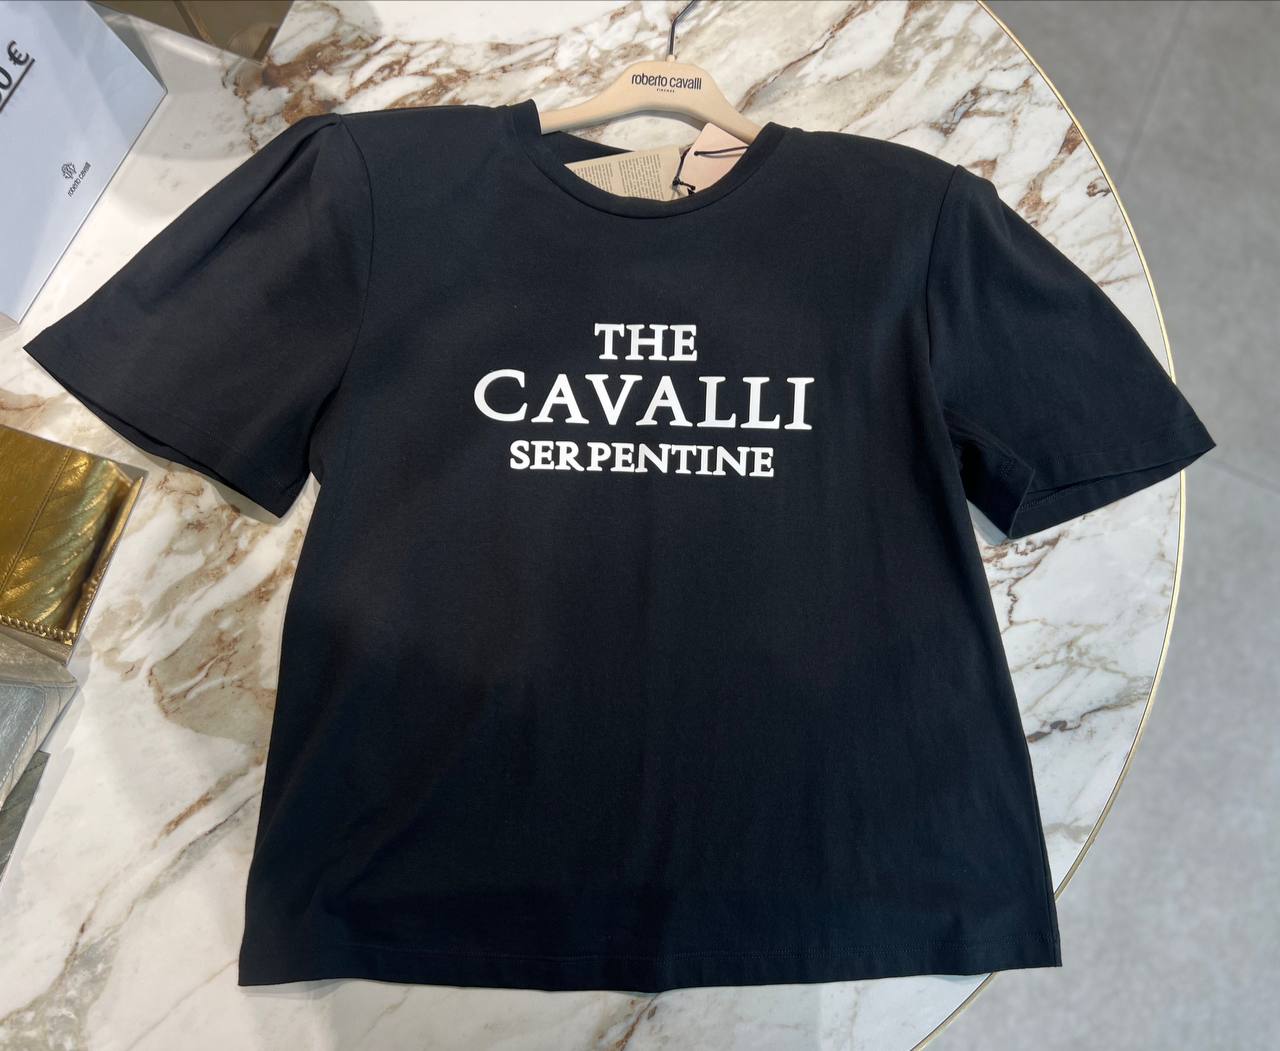 Roberto Cavalli Outlets 5716